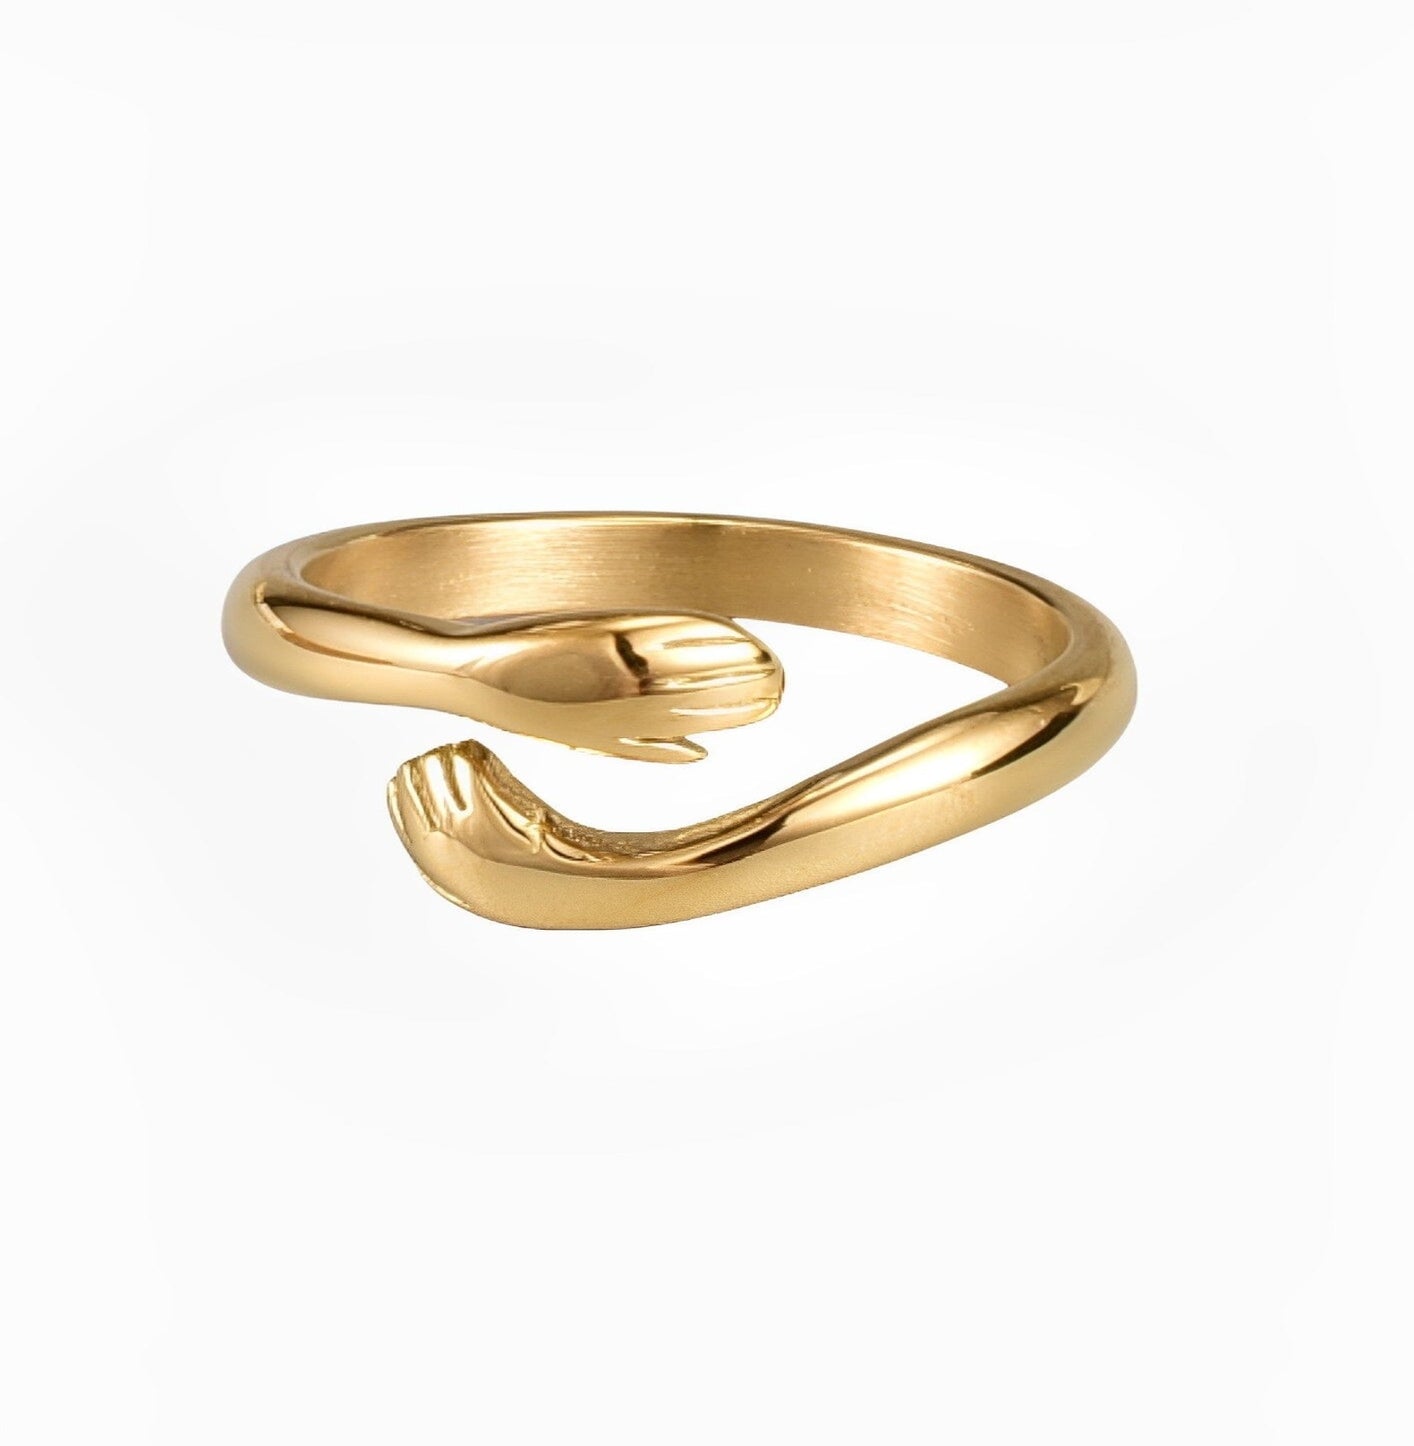 HUG RING ring Yubama Jewelry Online Store - The Elegant Designs of Gold and Silver ! 